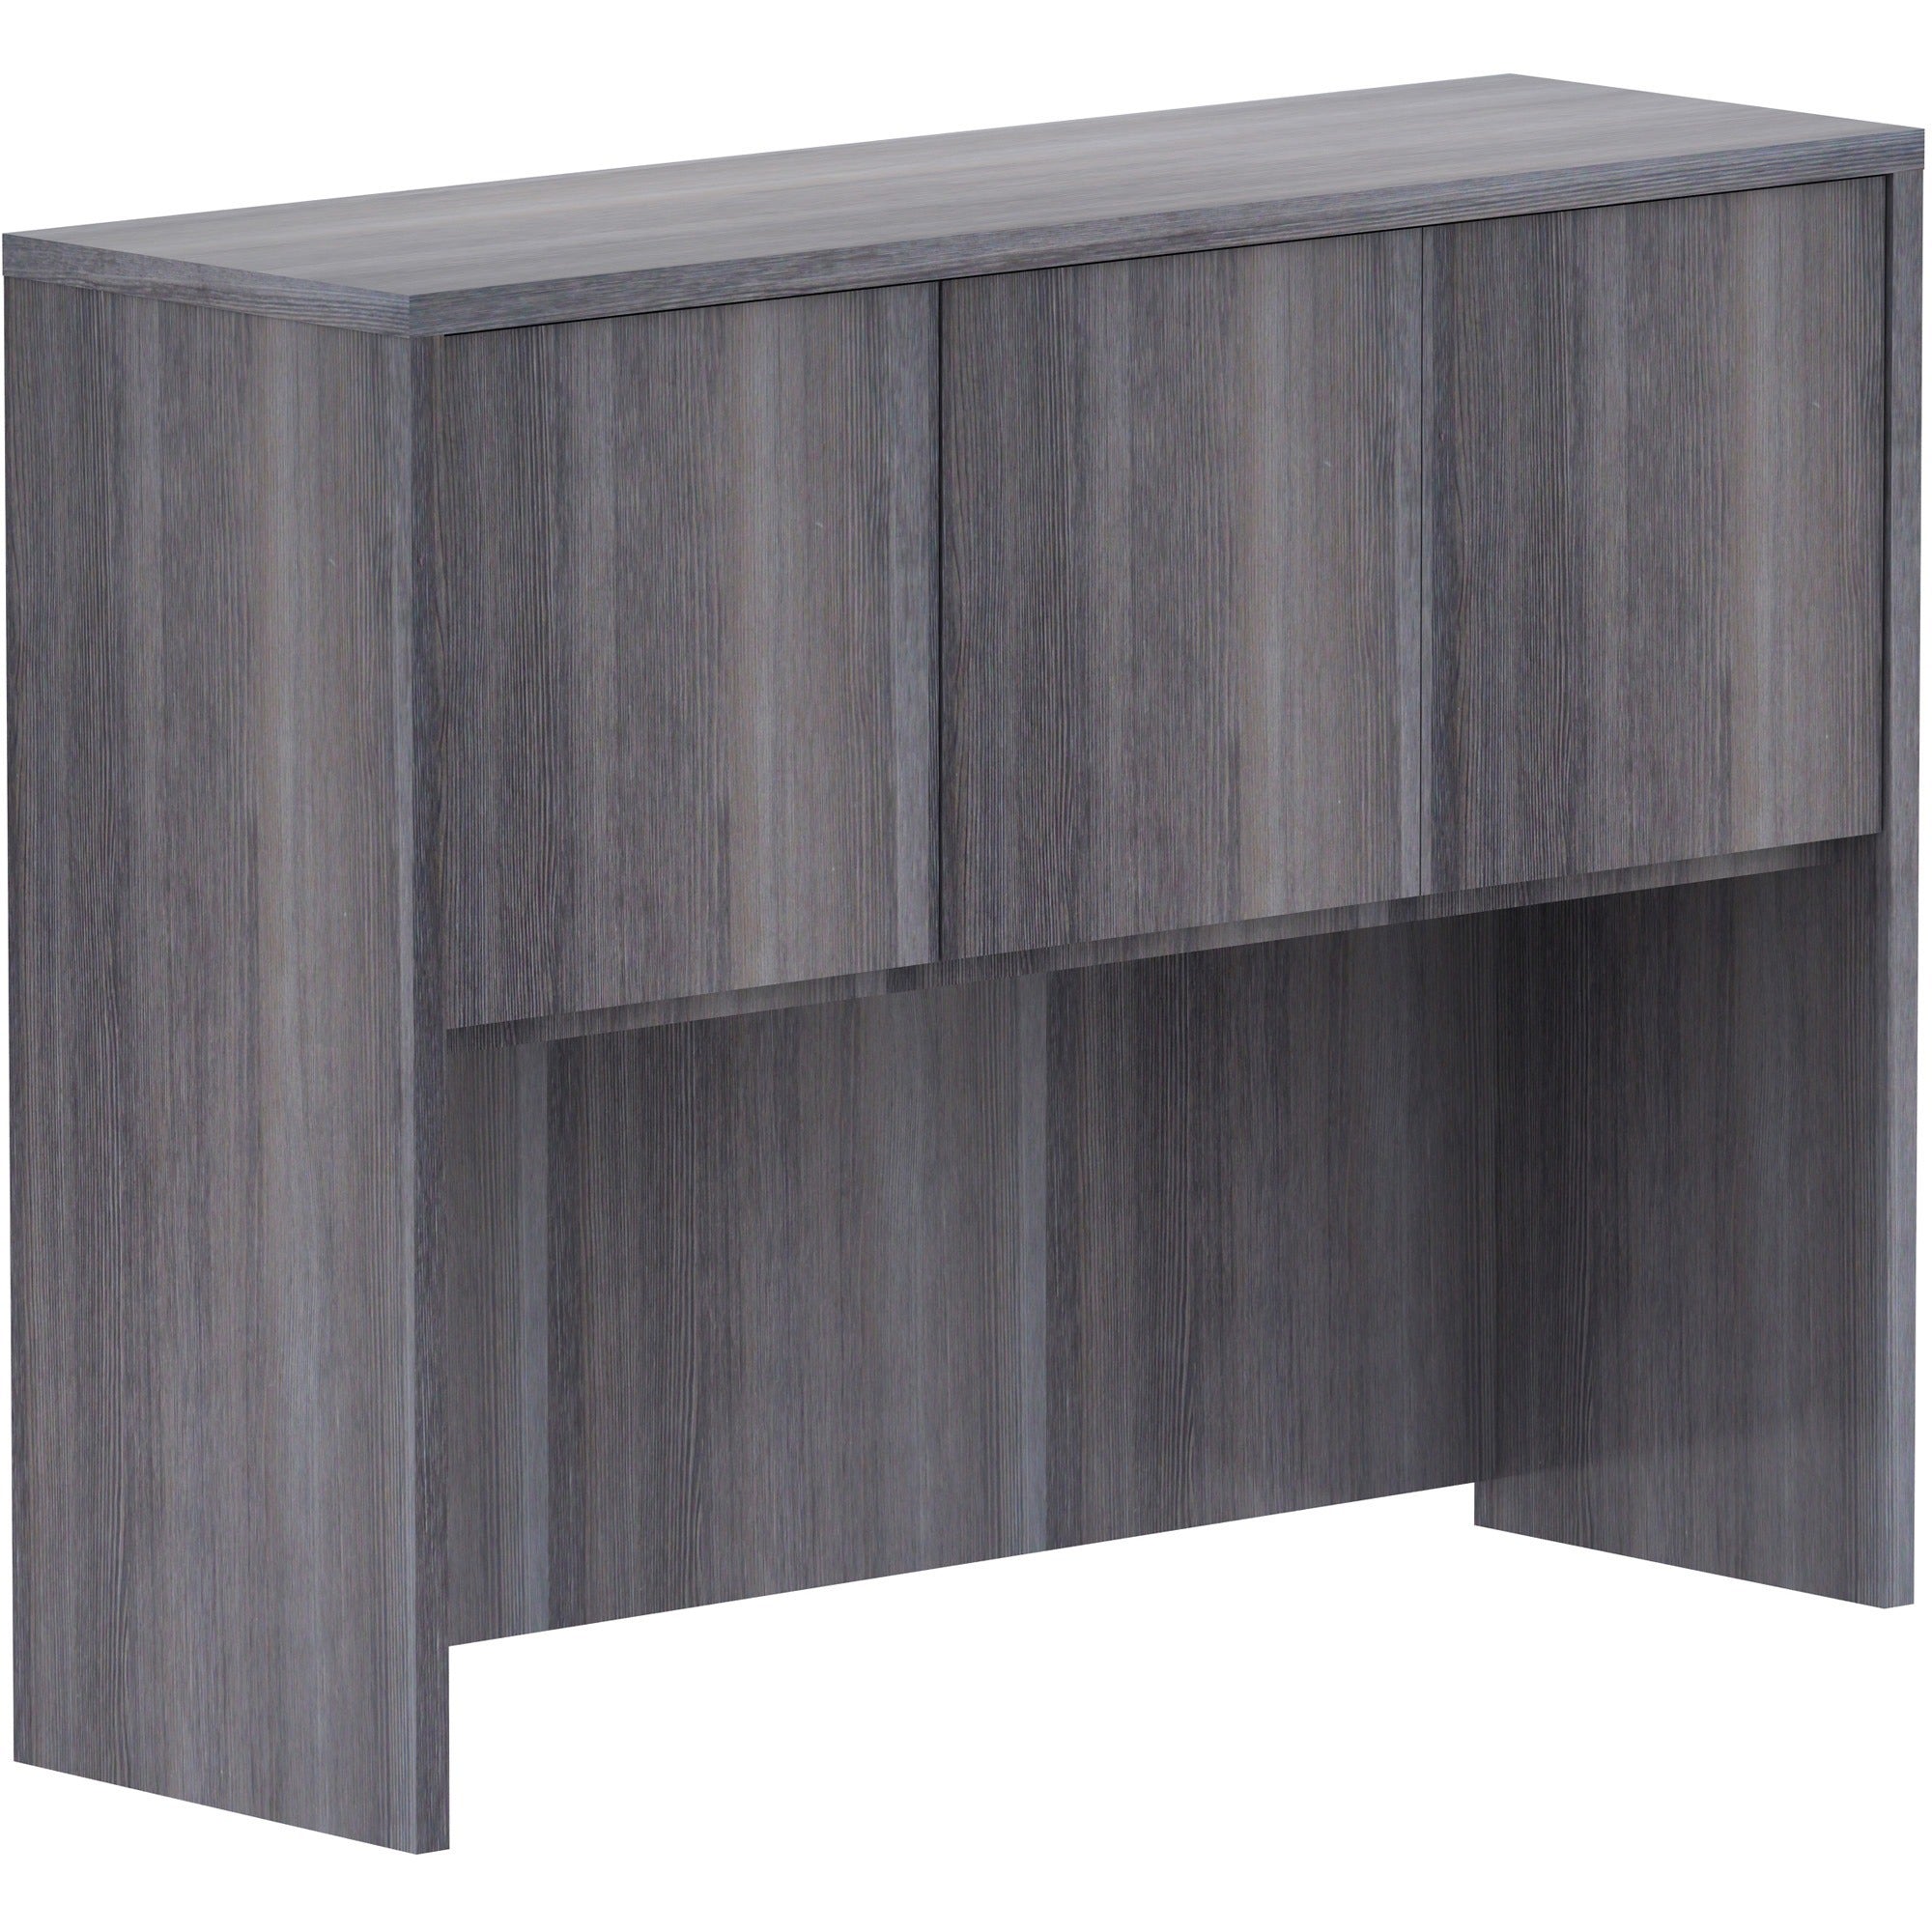 lorell-essentials-series-stack-on-hutch-with-doors-48-x-1536-3-doors-finish-weathered-charcoal-laminate_llr69621 - 1